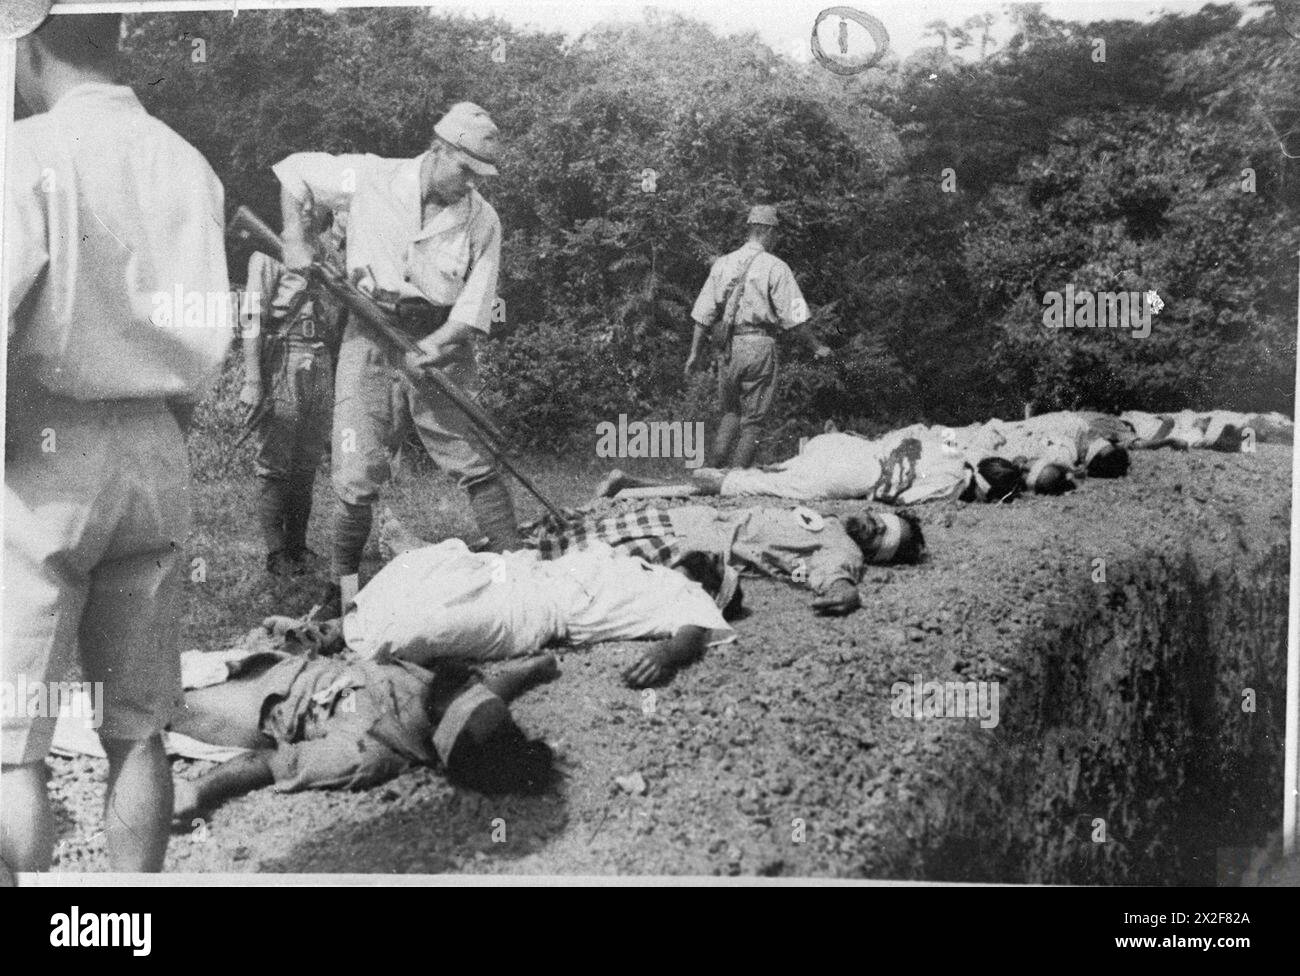 ATROCITIES CARRIED OUT BY JAPANESE FORCES DURING THE SECOND WORLD WAR - Japanese soldier bayonetting one of the executed Sikh prisoners , Stock Photo